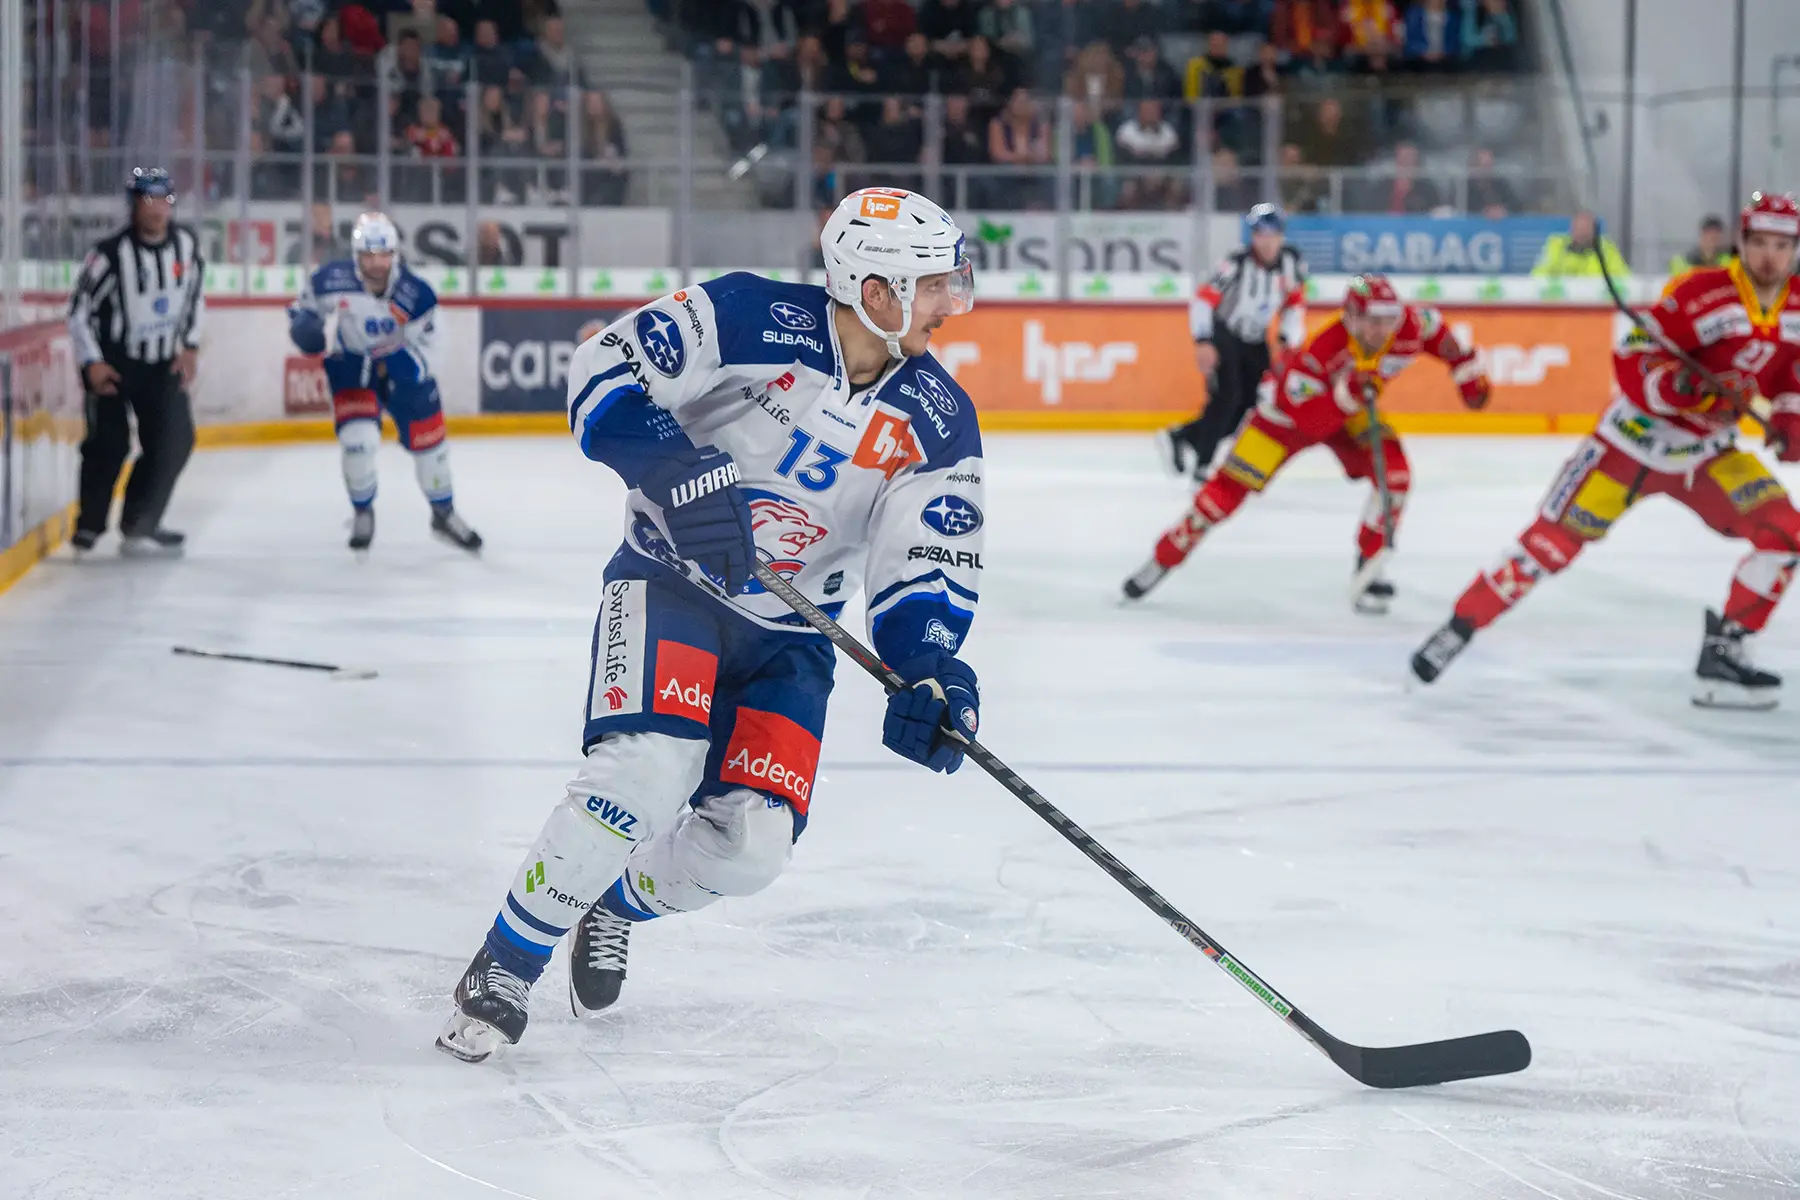 National League hockey game between ZSC Lions and EHC Biel-Bienne